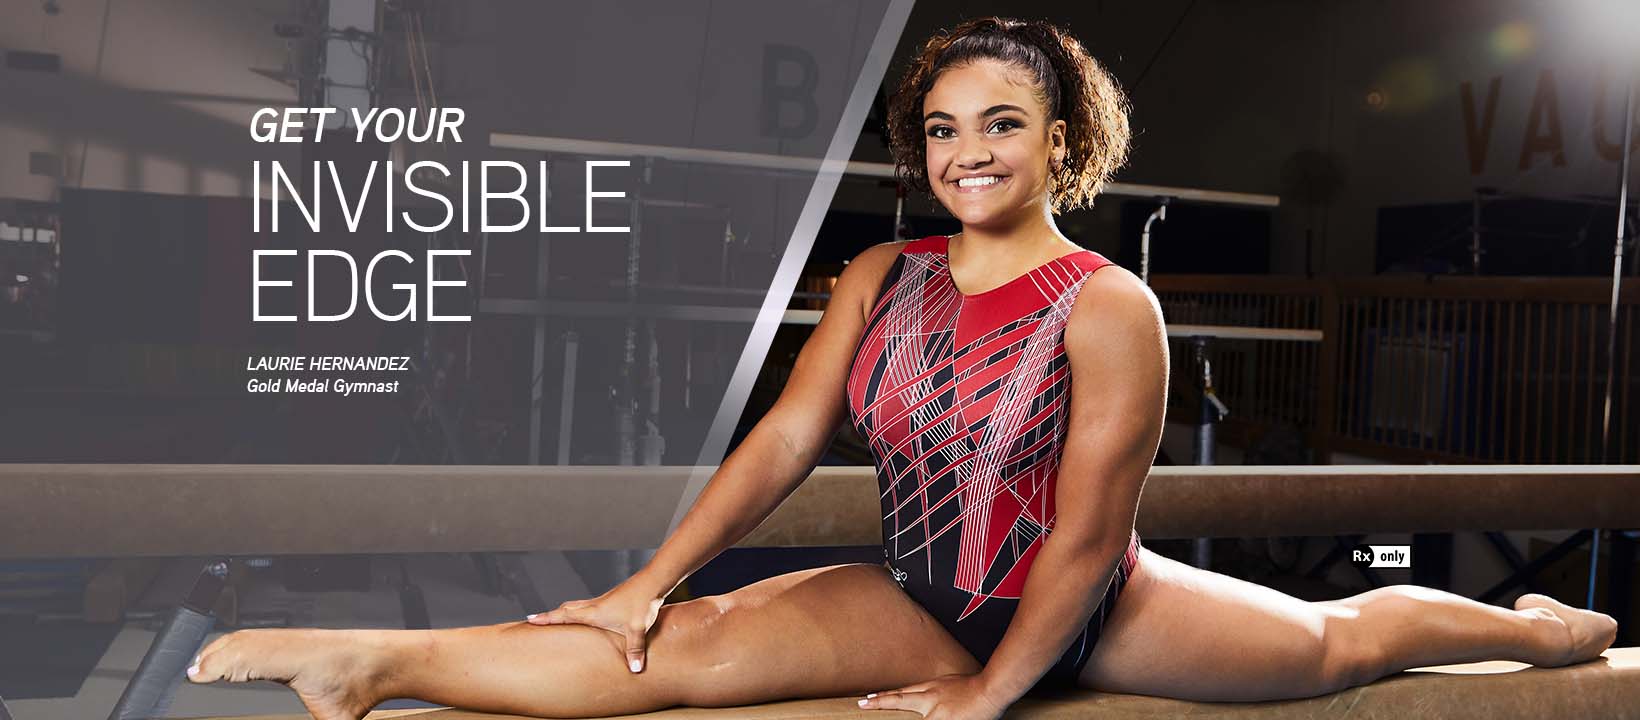 Laurie Hernandez, Olympic Gold- and Silver- Medalist Gymnast.